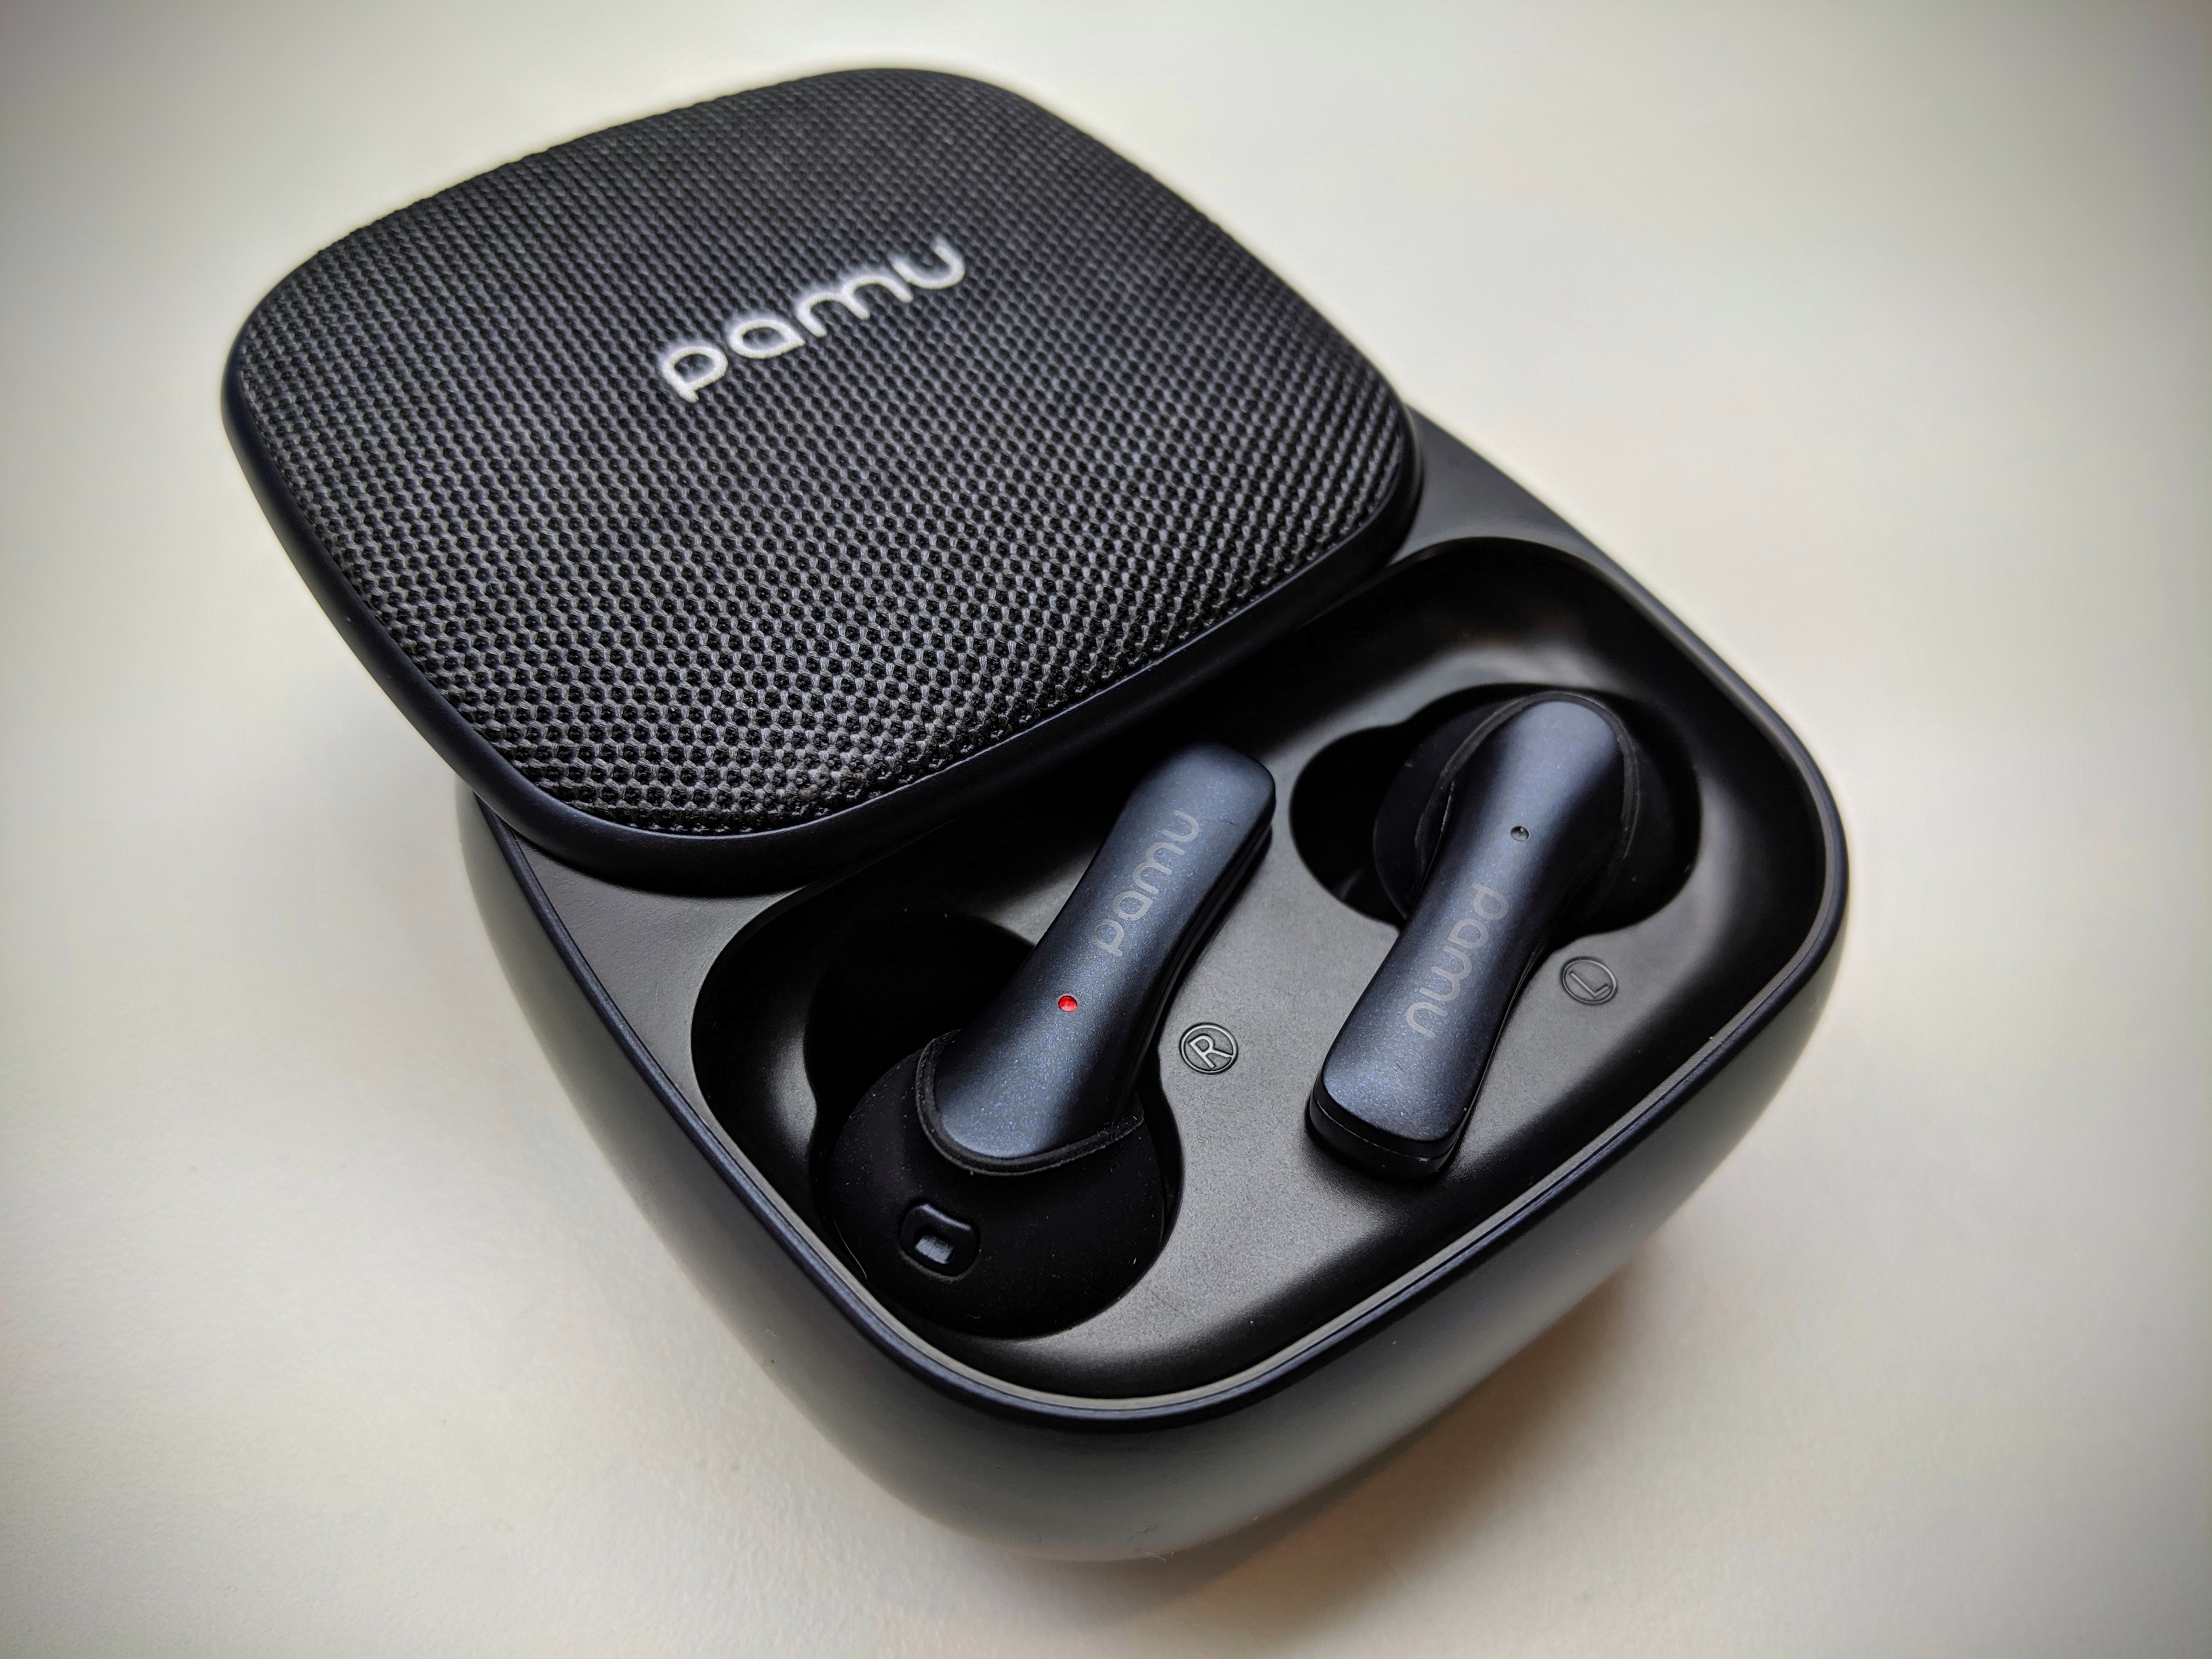 Pamu Slide Plus Case and Earbuds Open